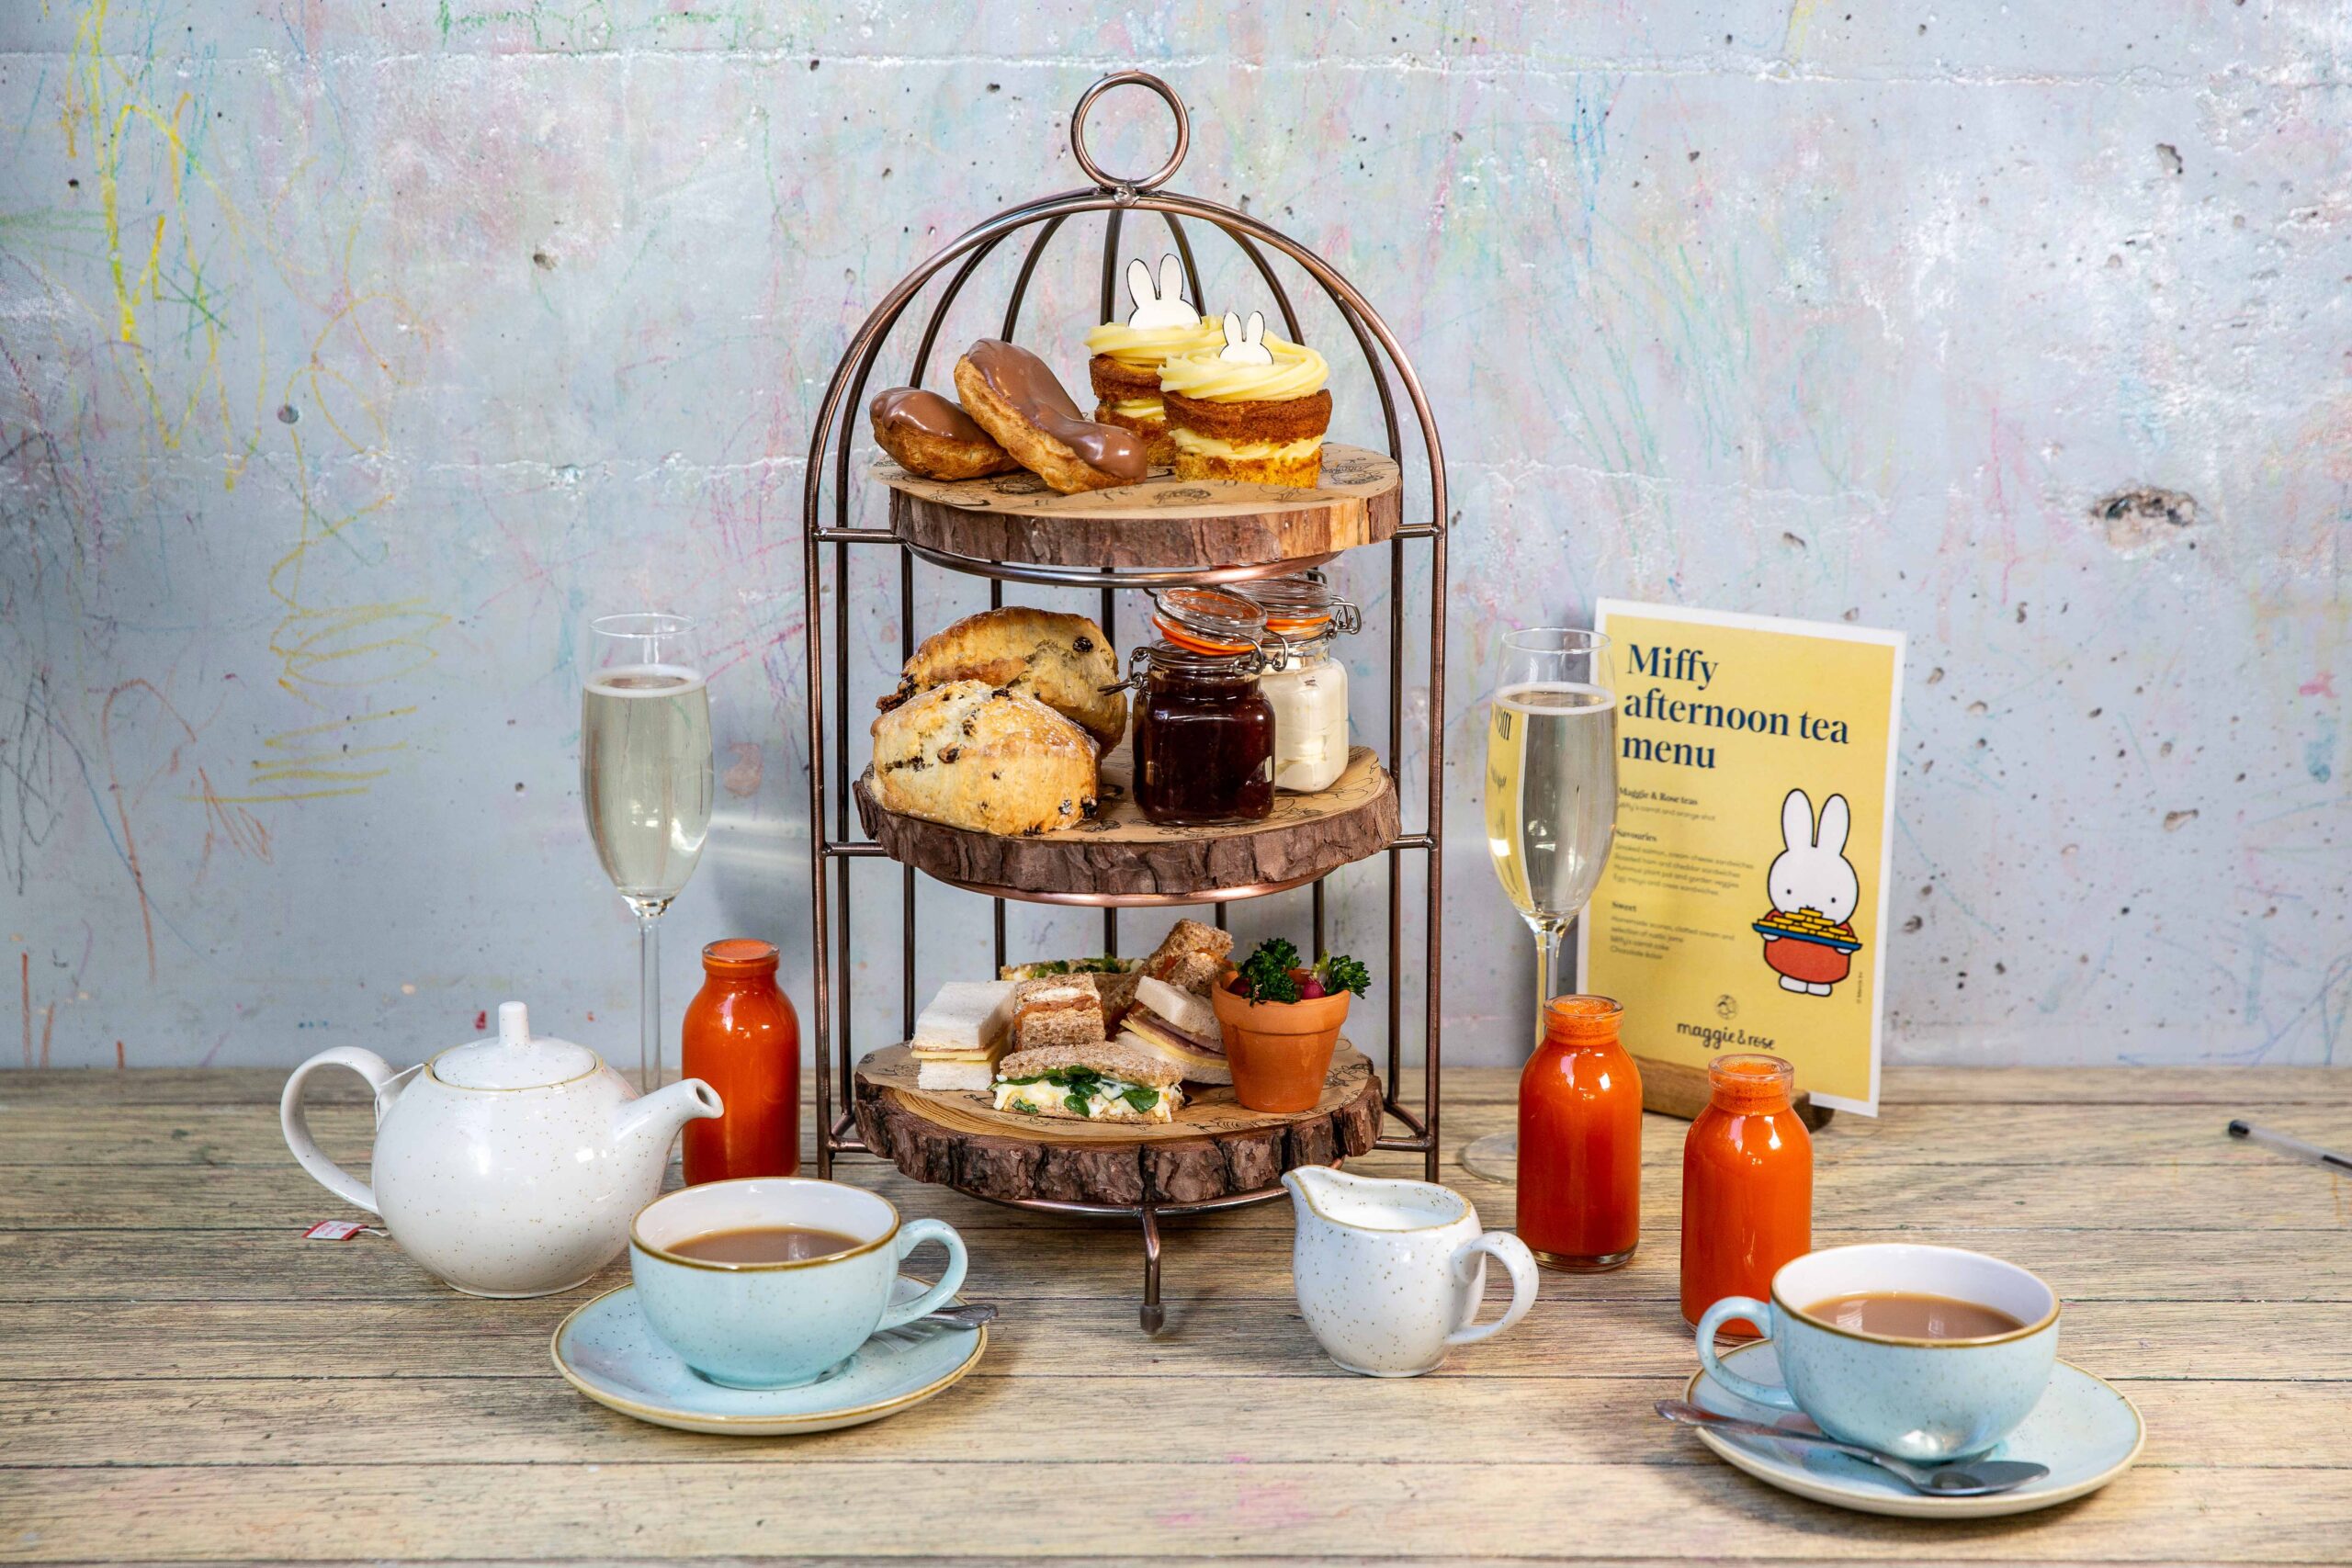 Miffy Afternoon Tea launches in London